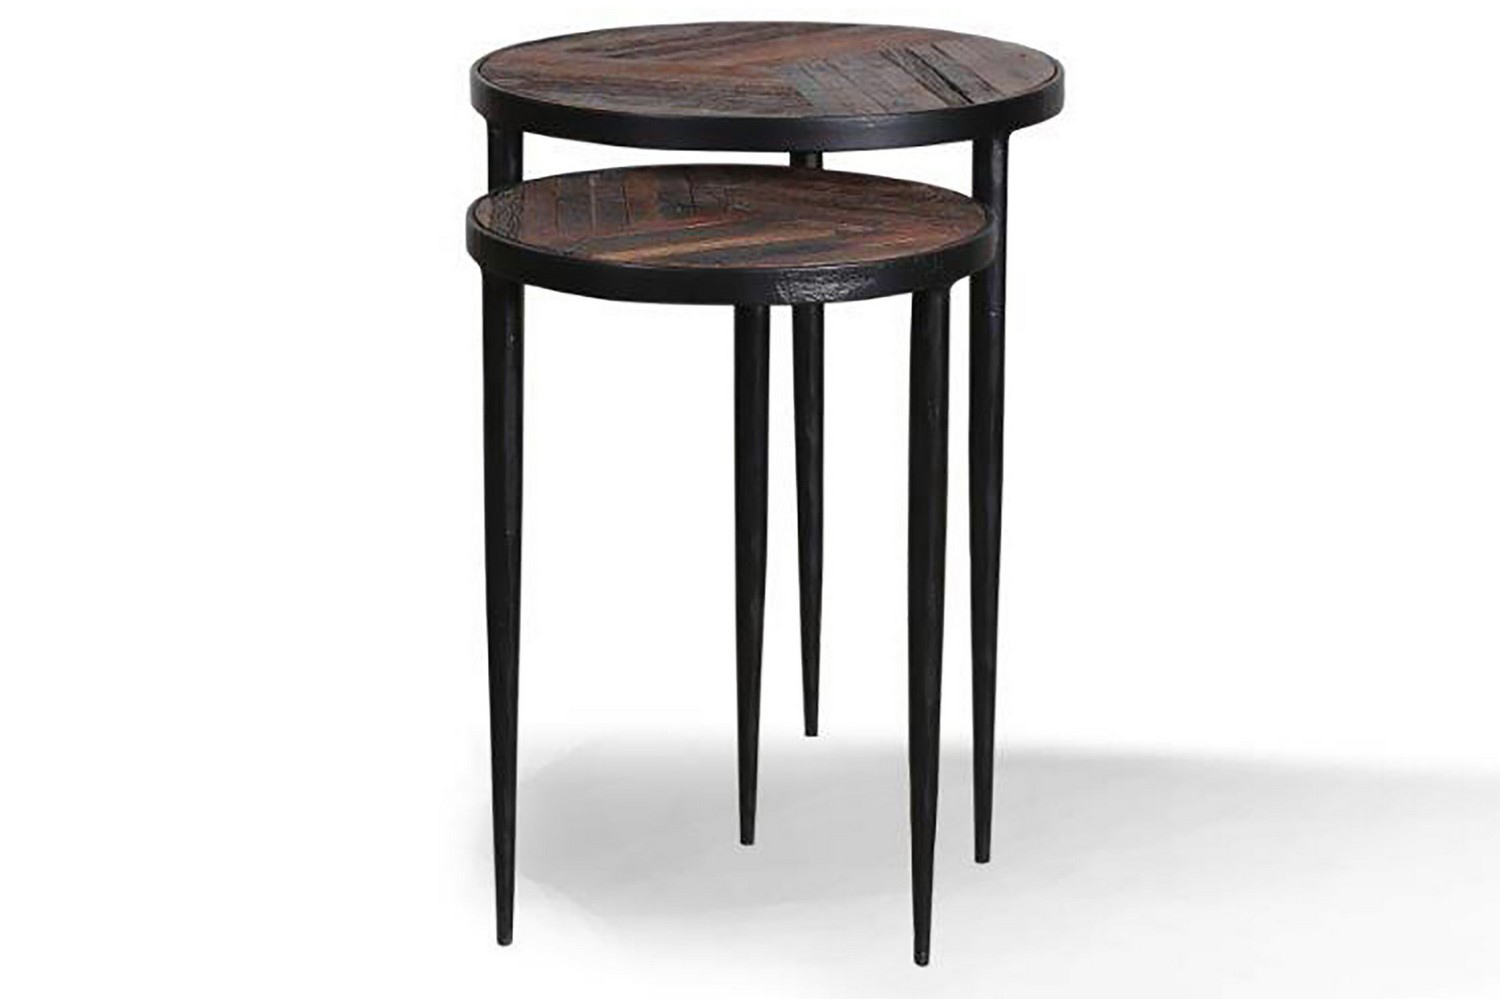 Parker House Crossings The Underground Round Chairside Nesting Table - Reclaimed Rustic Brown